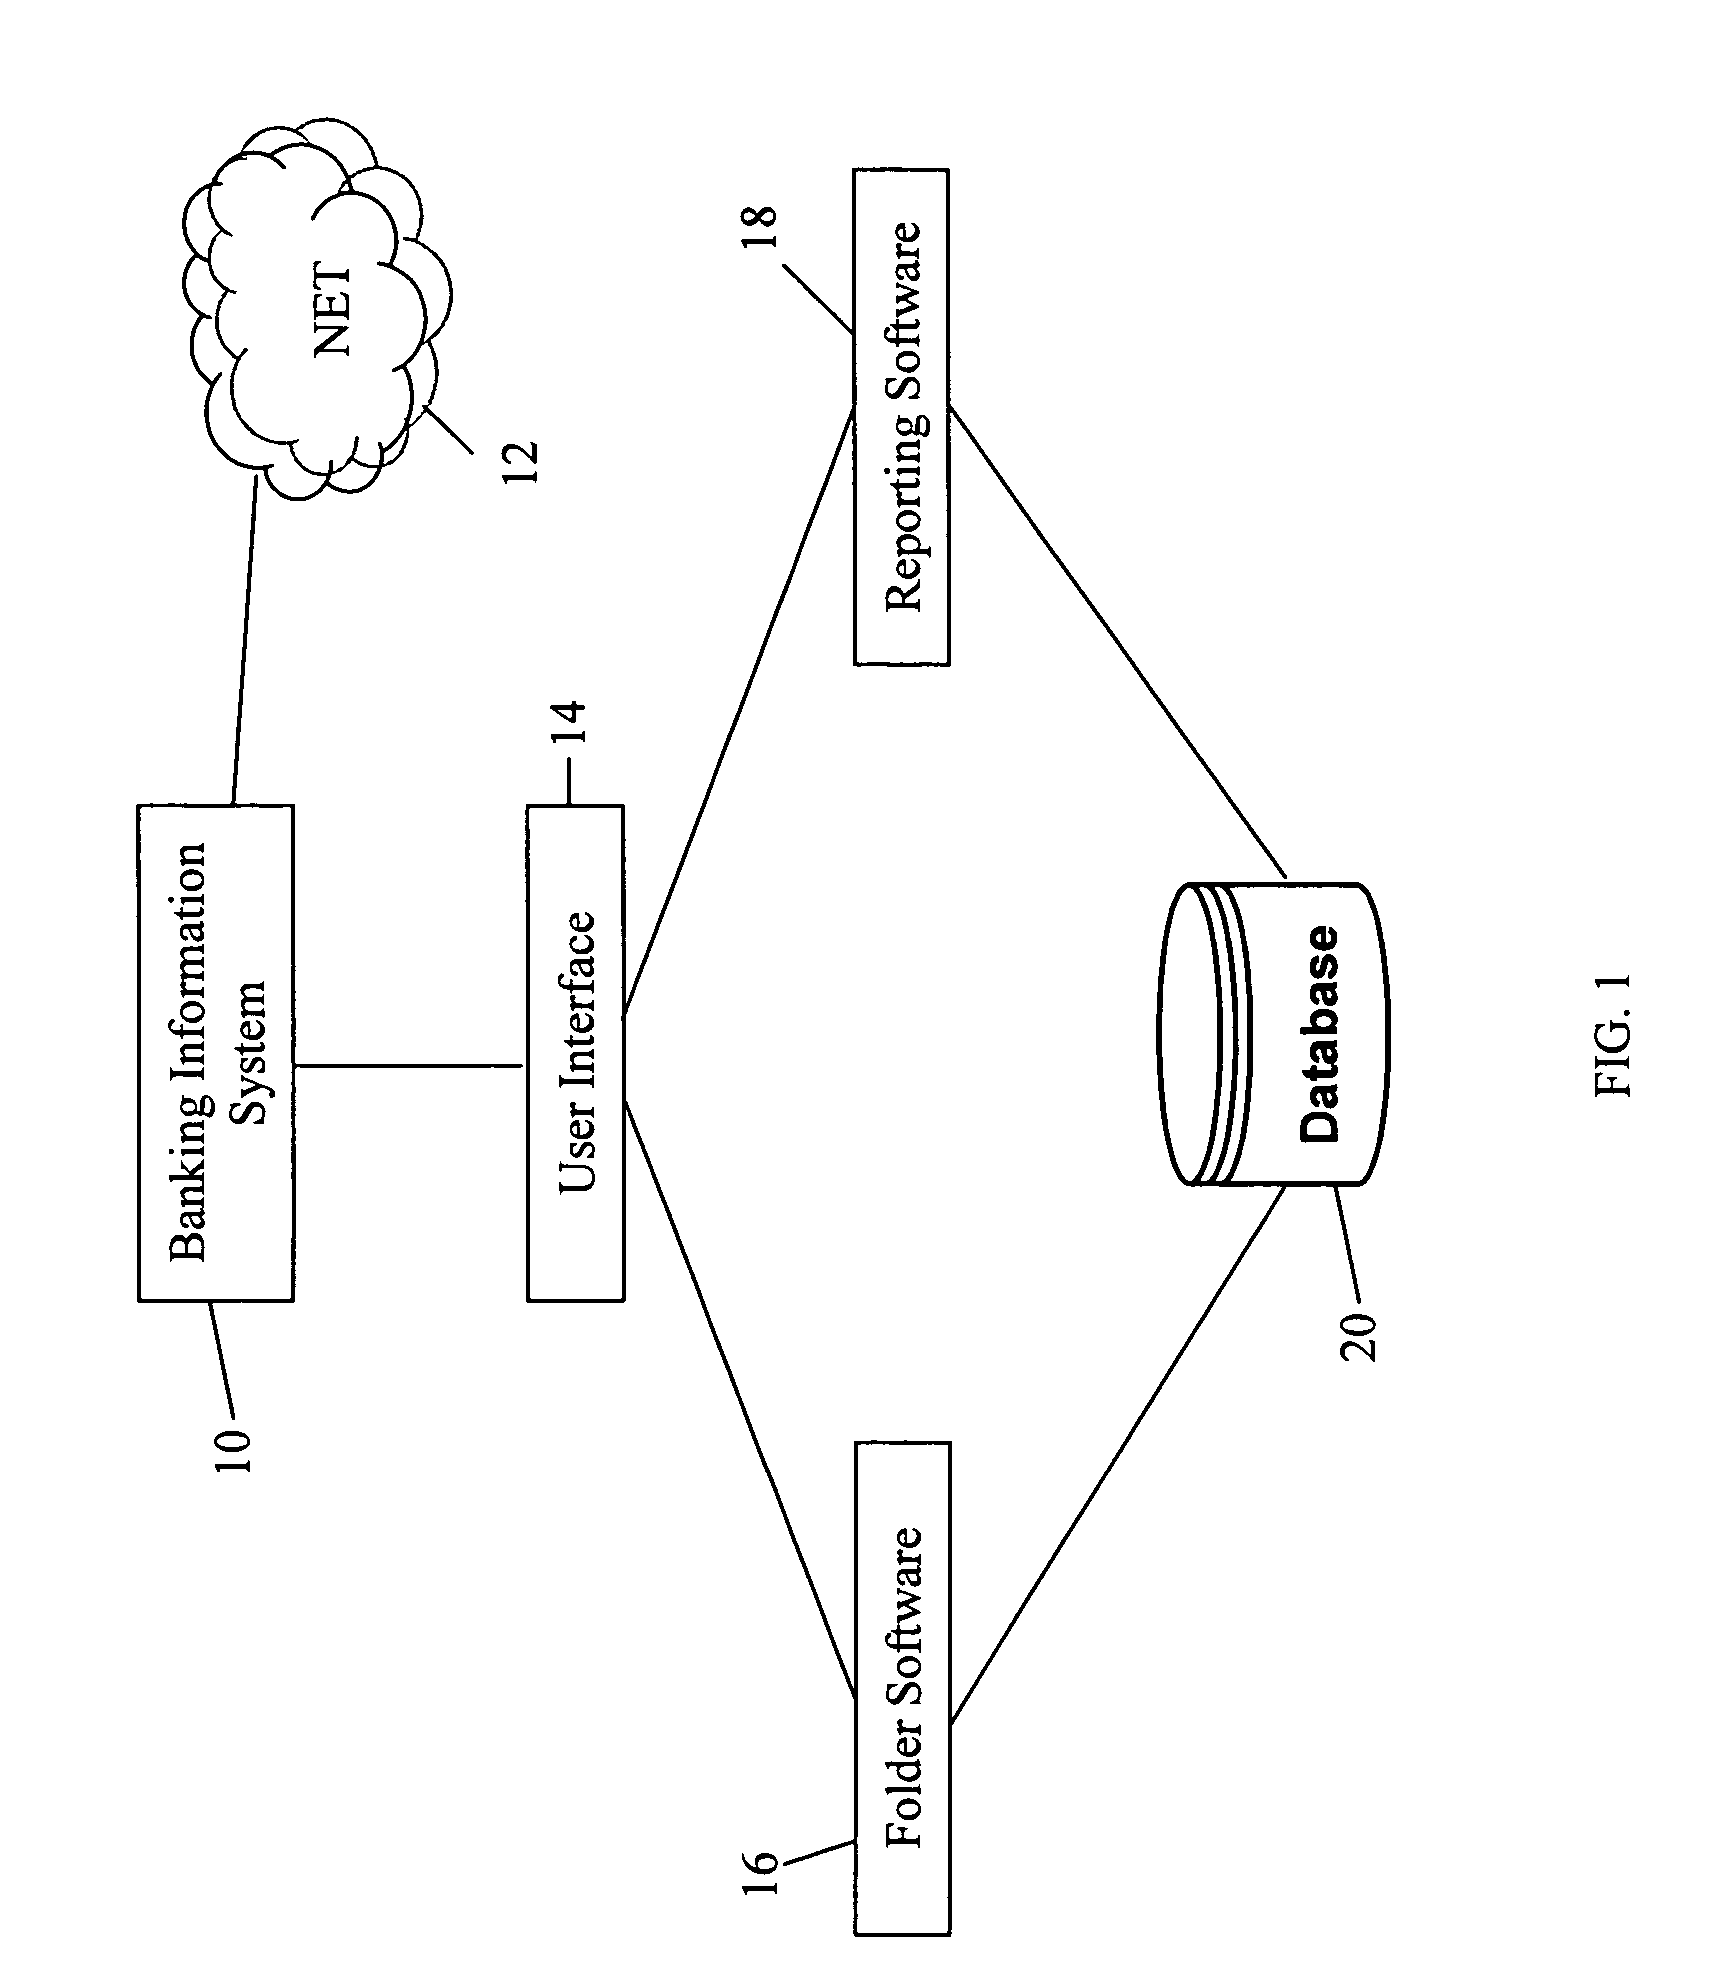 System and method for storing, creating, and organizing financial information electronically